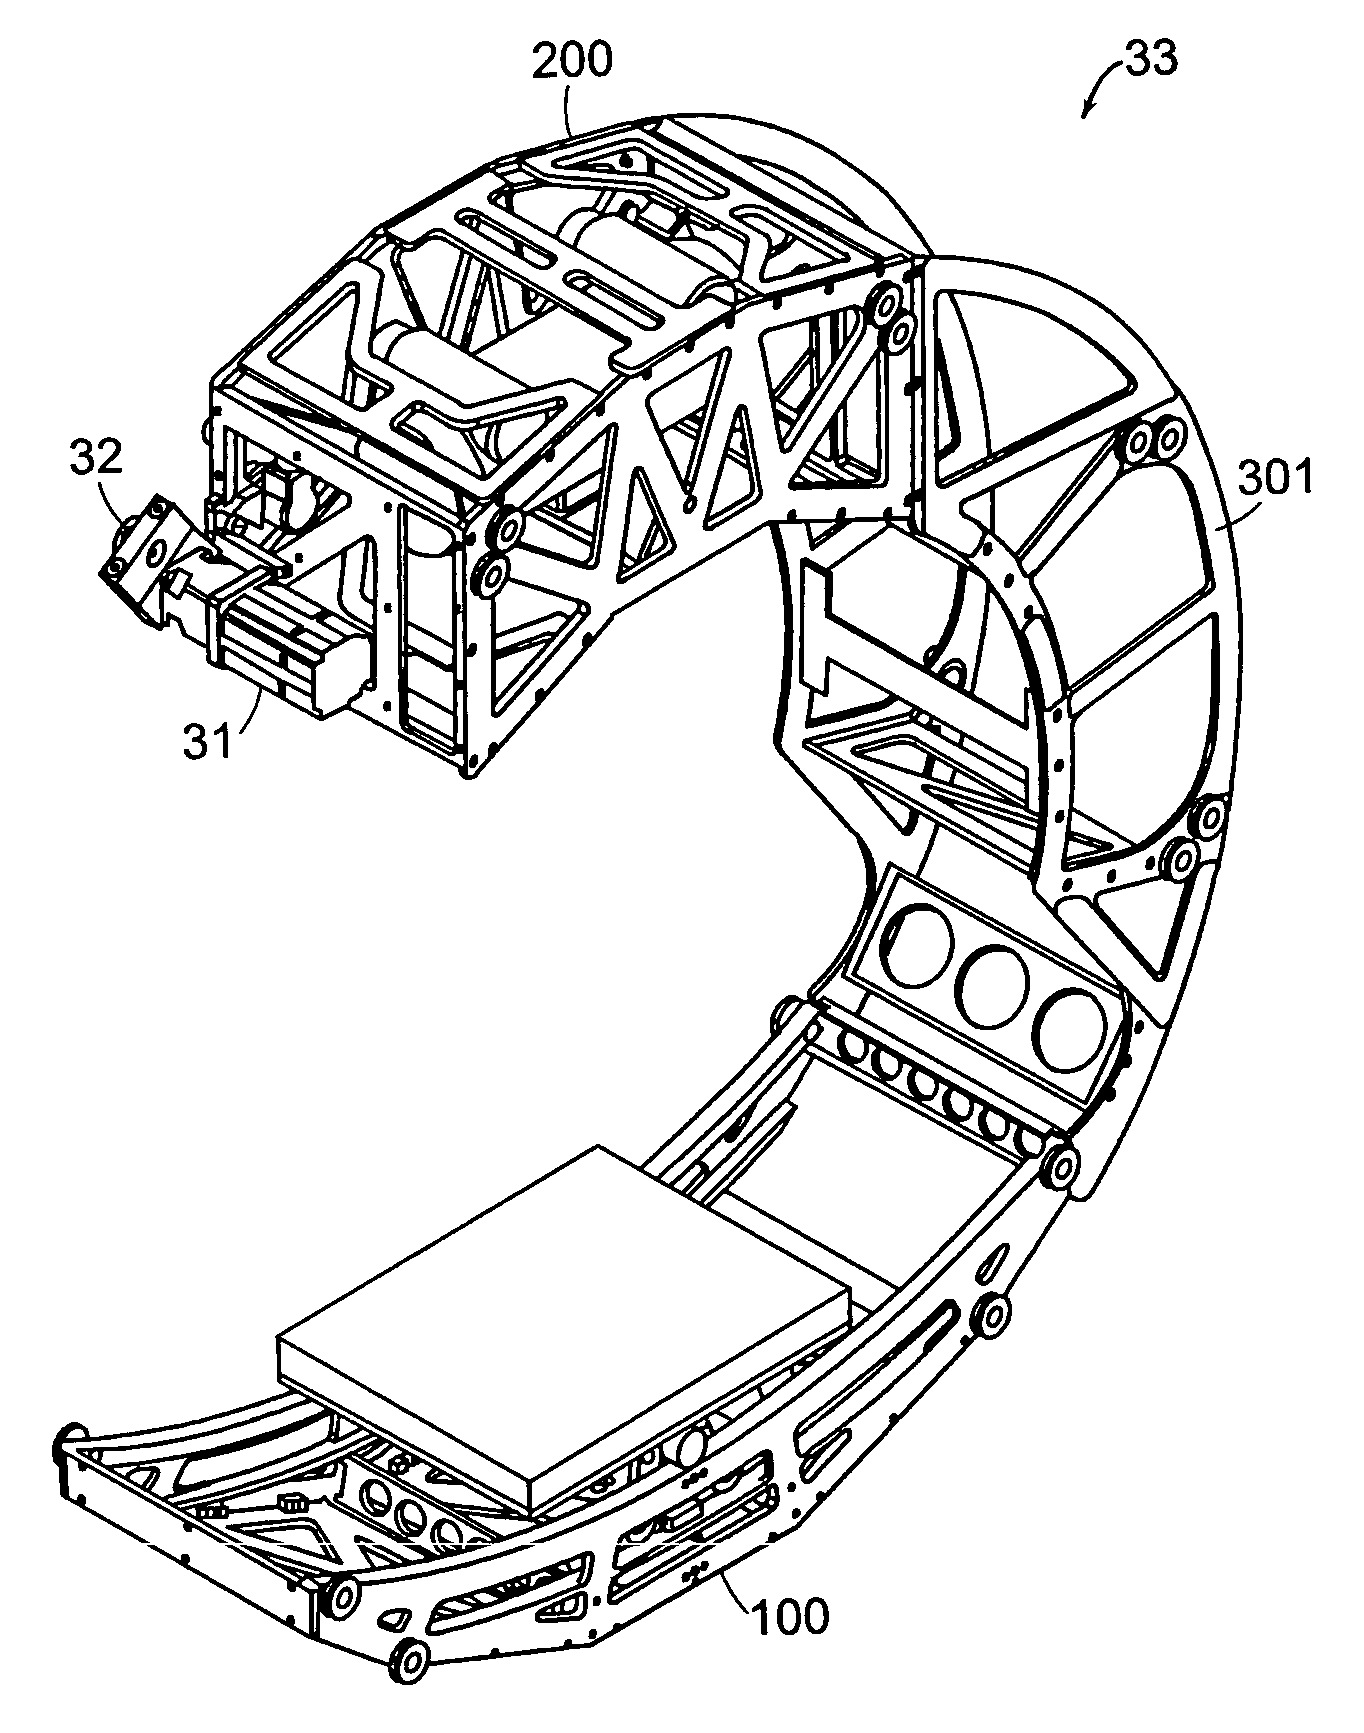 Systems and methods for imaging large field-of-view objects